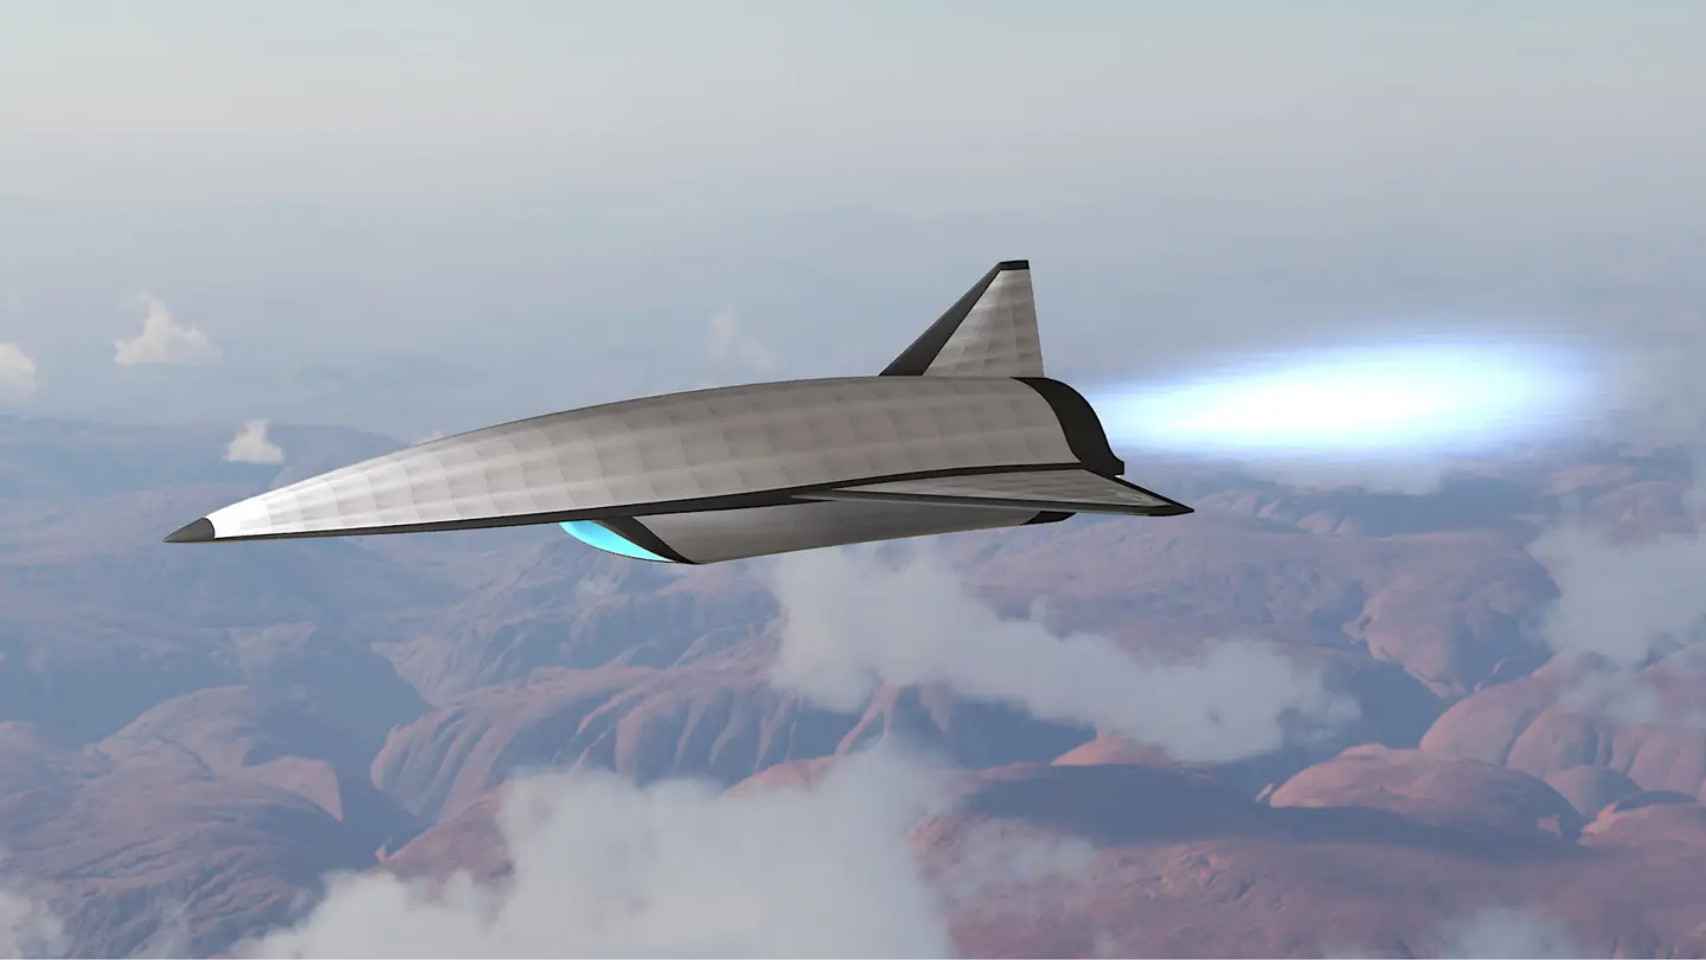 The US hypersonic bomber will fly at more than 6,000 km/h